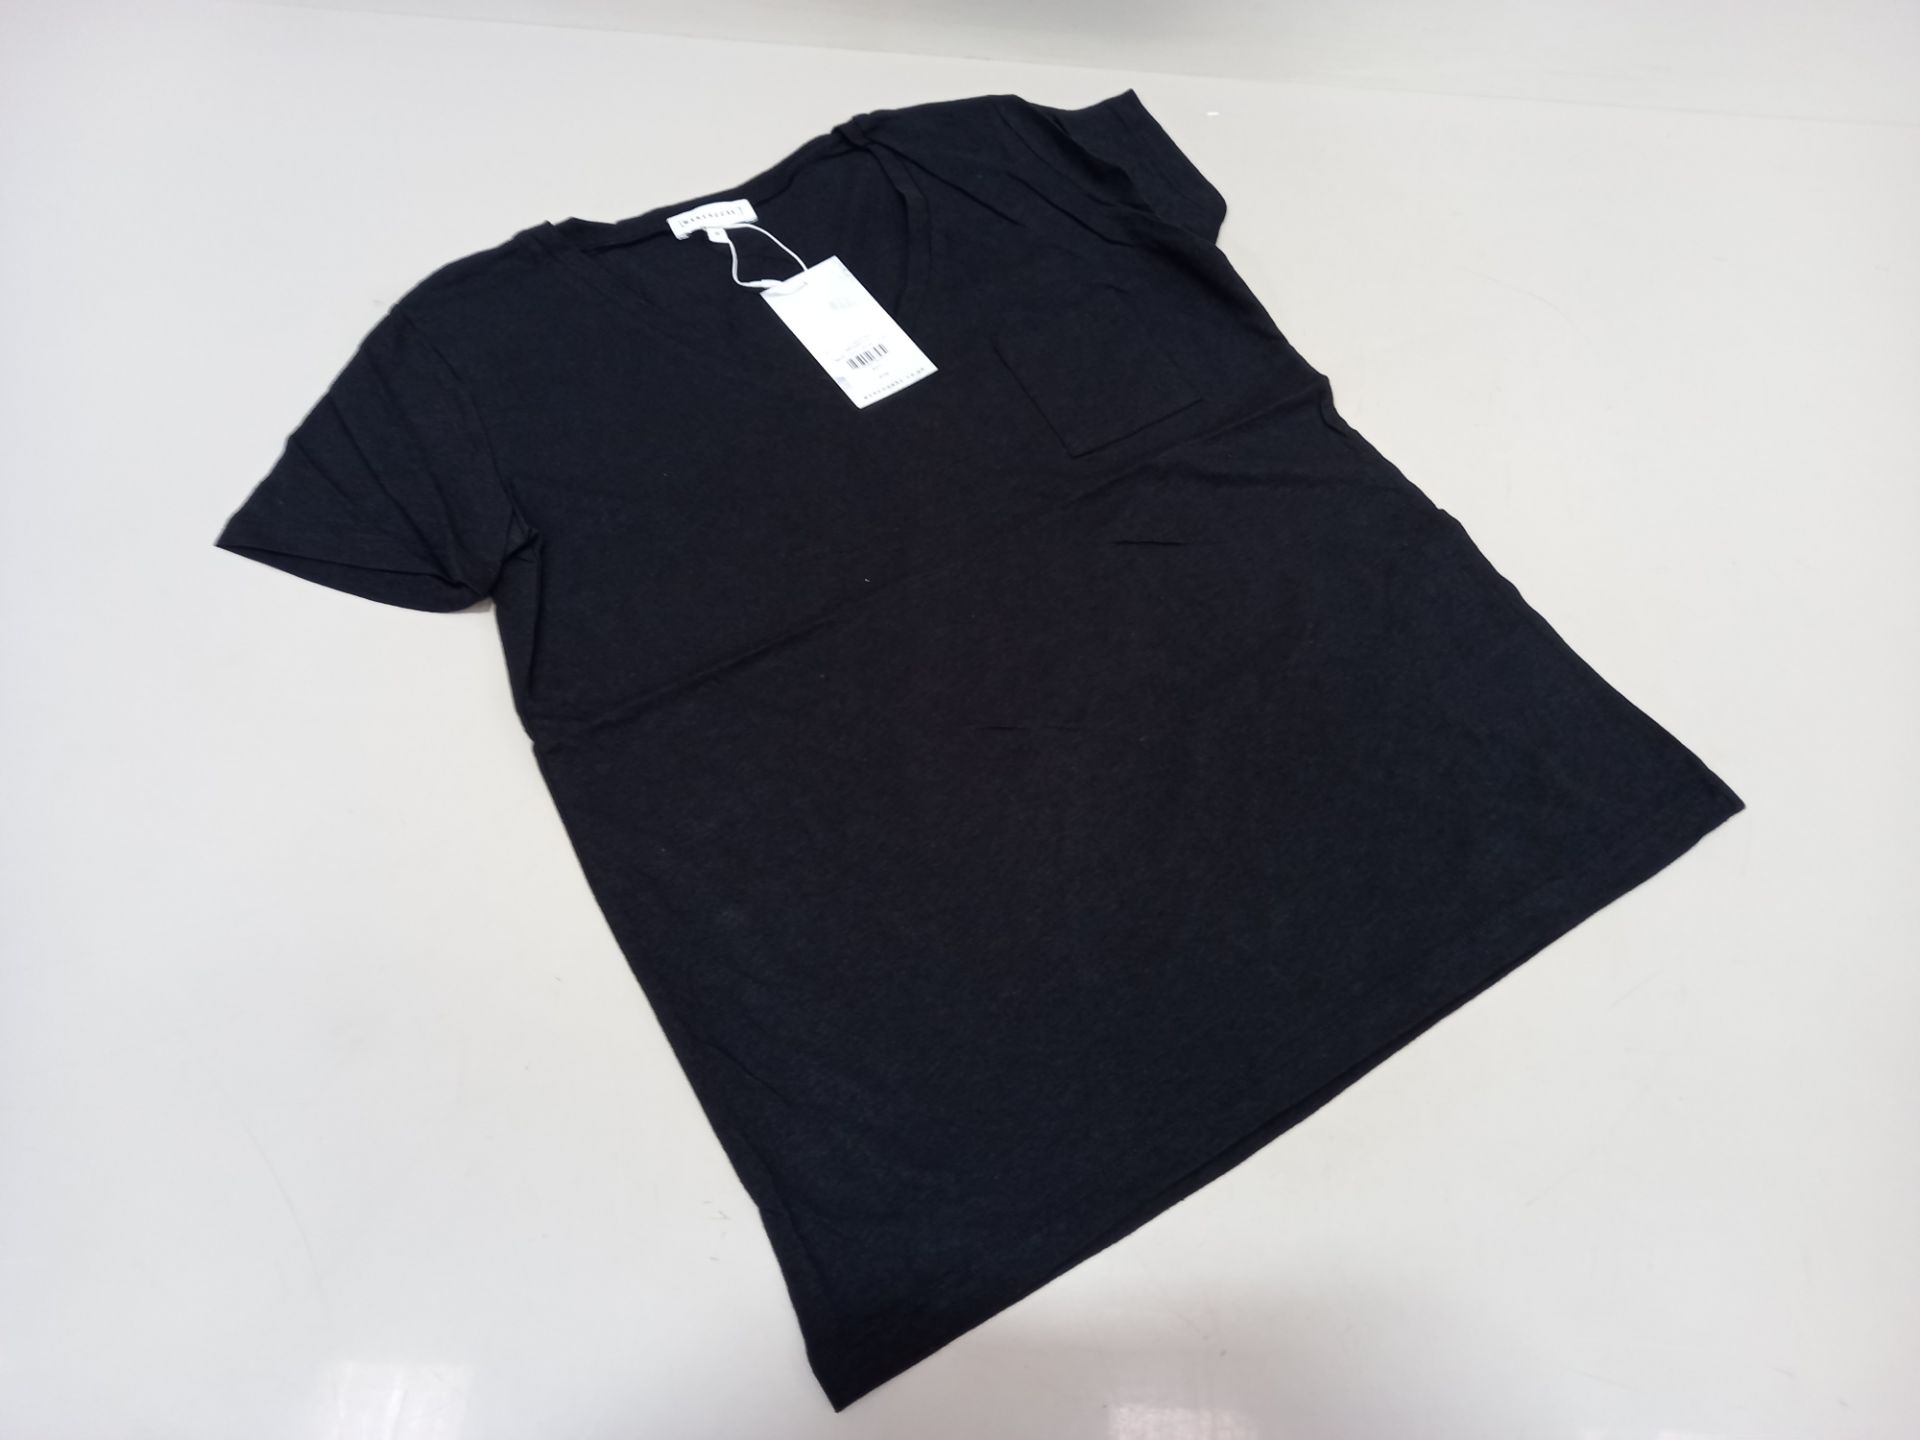 24 X BRAND NEW WAREHOUSE CLOTHING BLACK LINEN V NECK T SHIRTS IN VARIOUS SIZES RRP Â£16.00